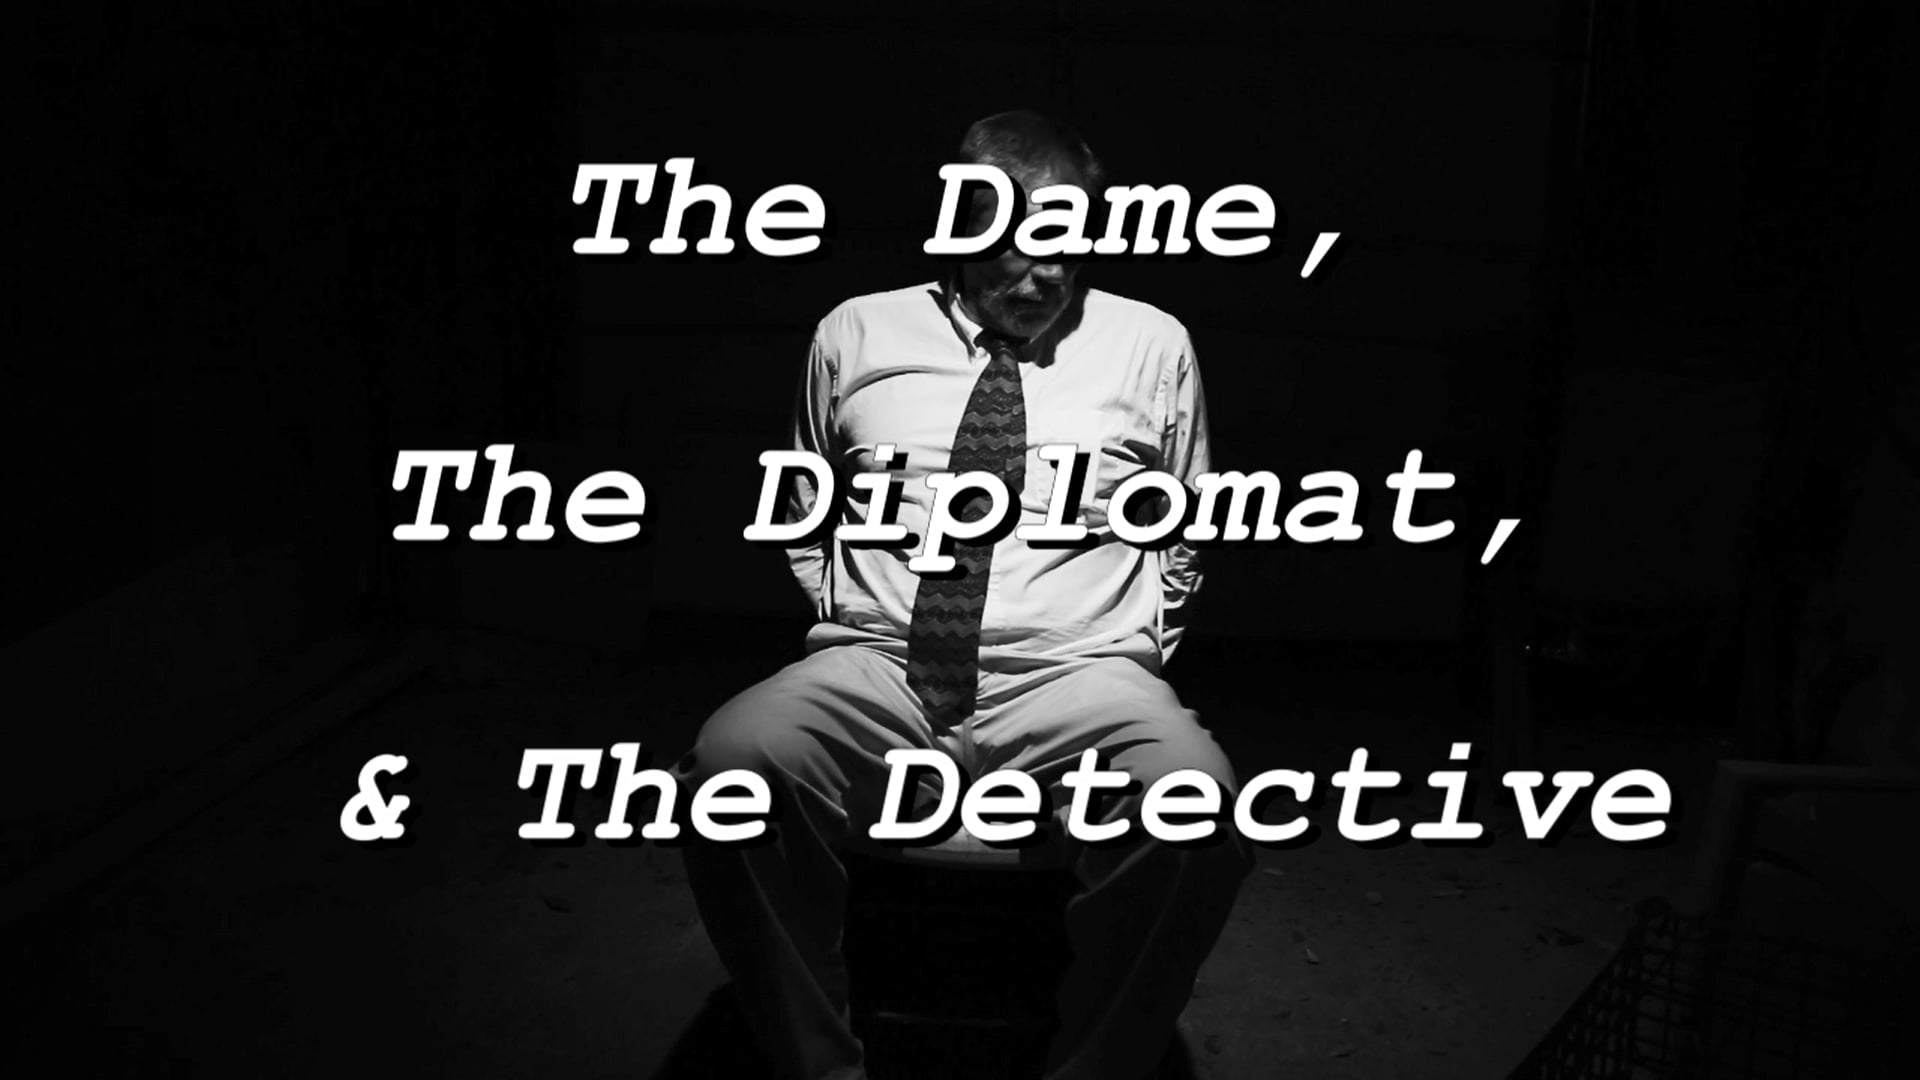 The Dame, The Diplomat, & The Detective